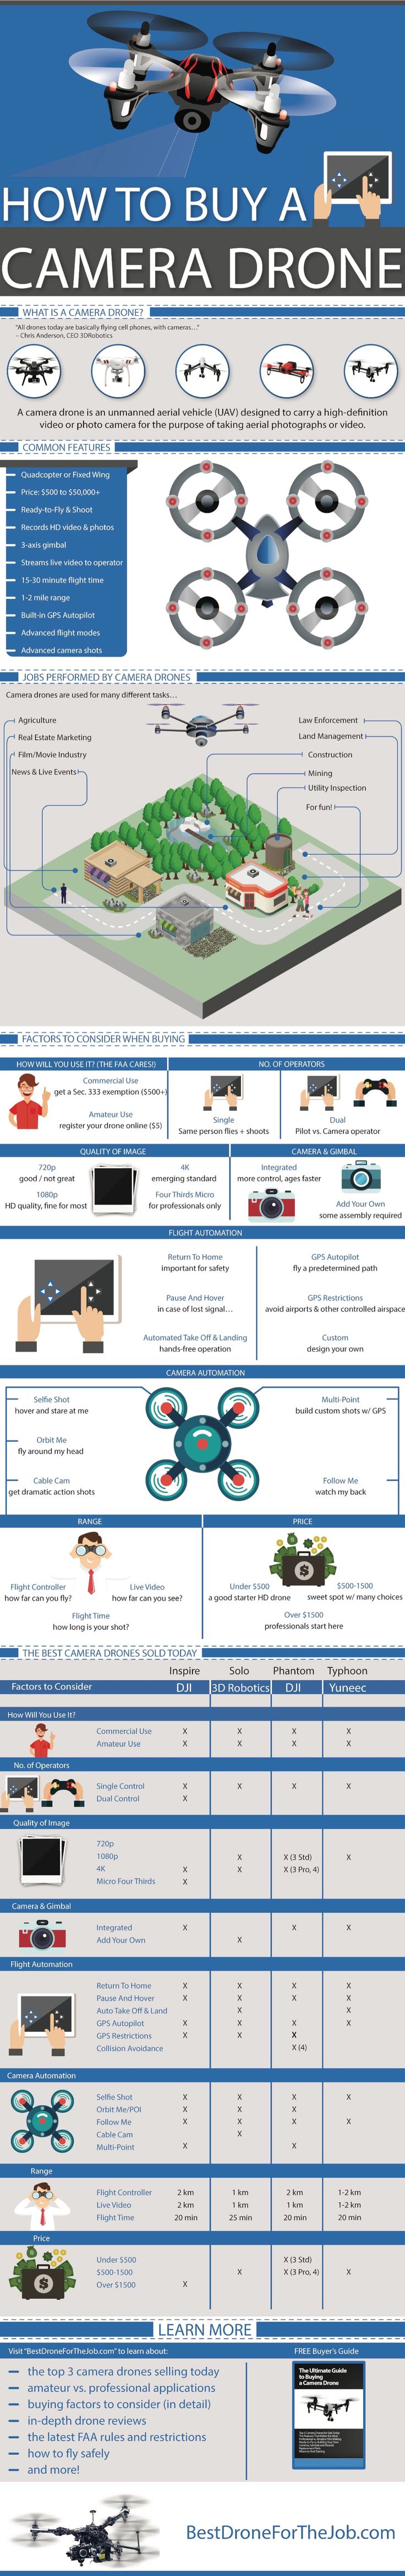 Looking to get your hands on a camera drone? This infographic should come in han...